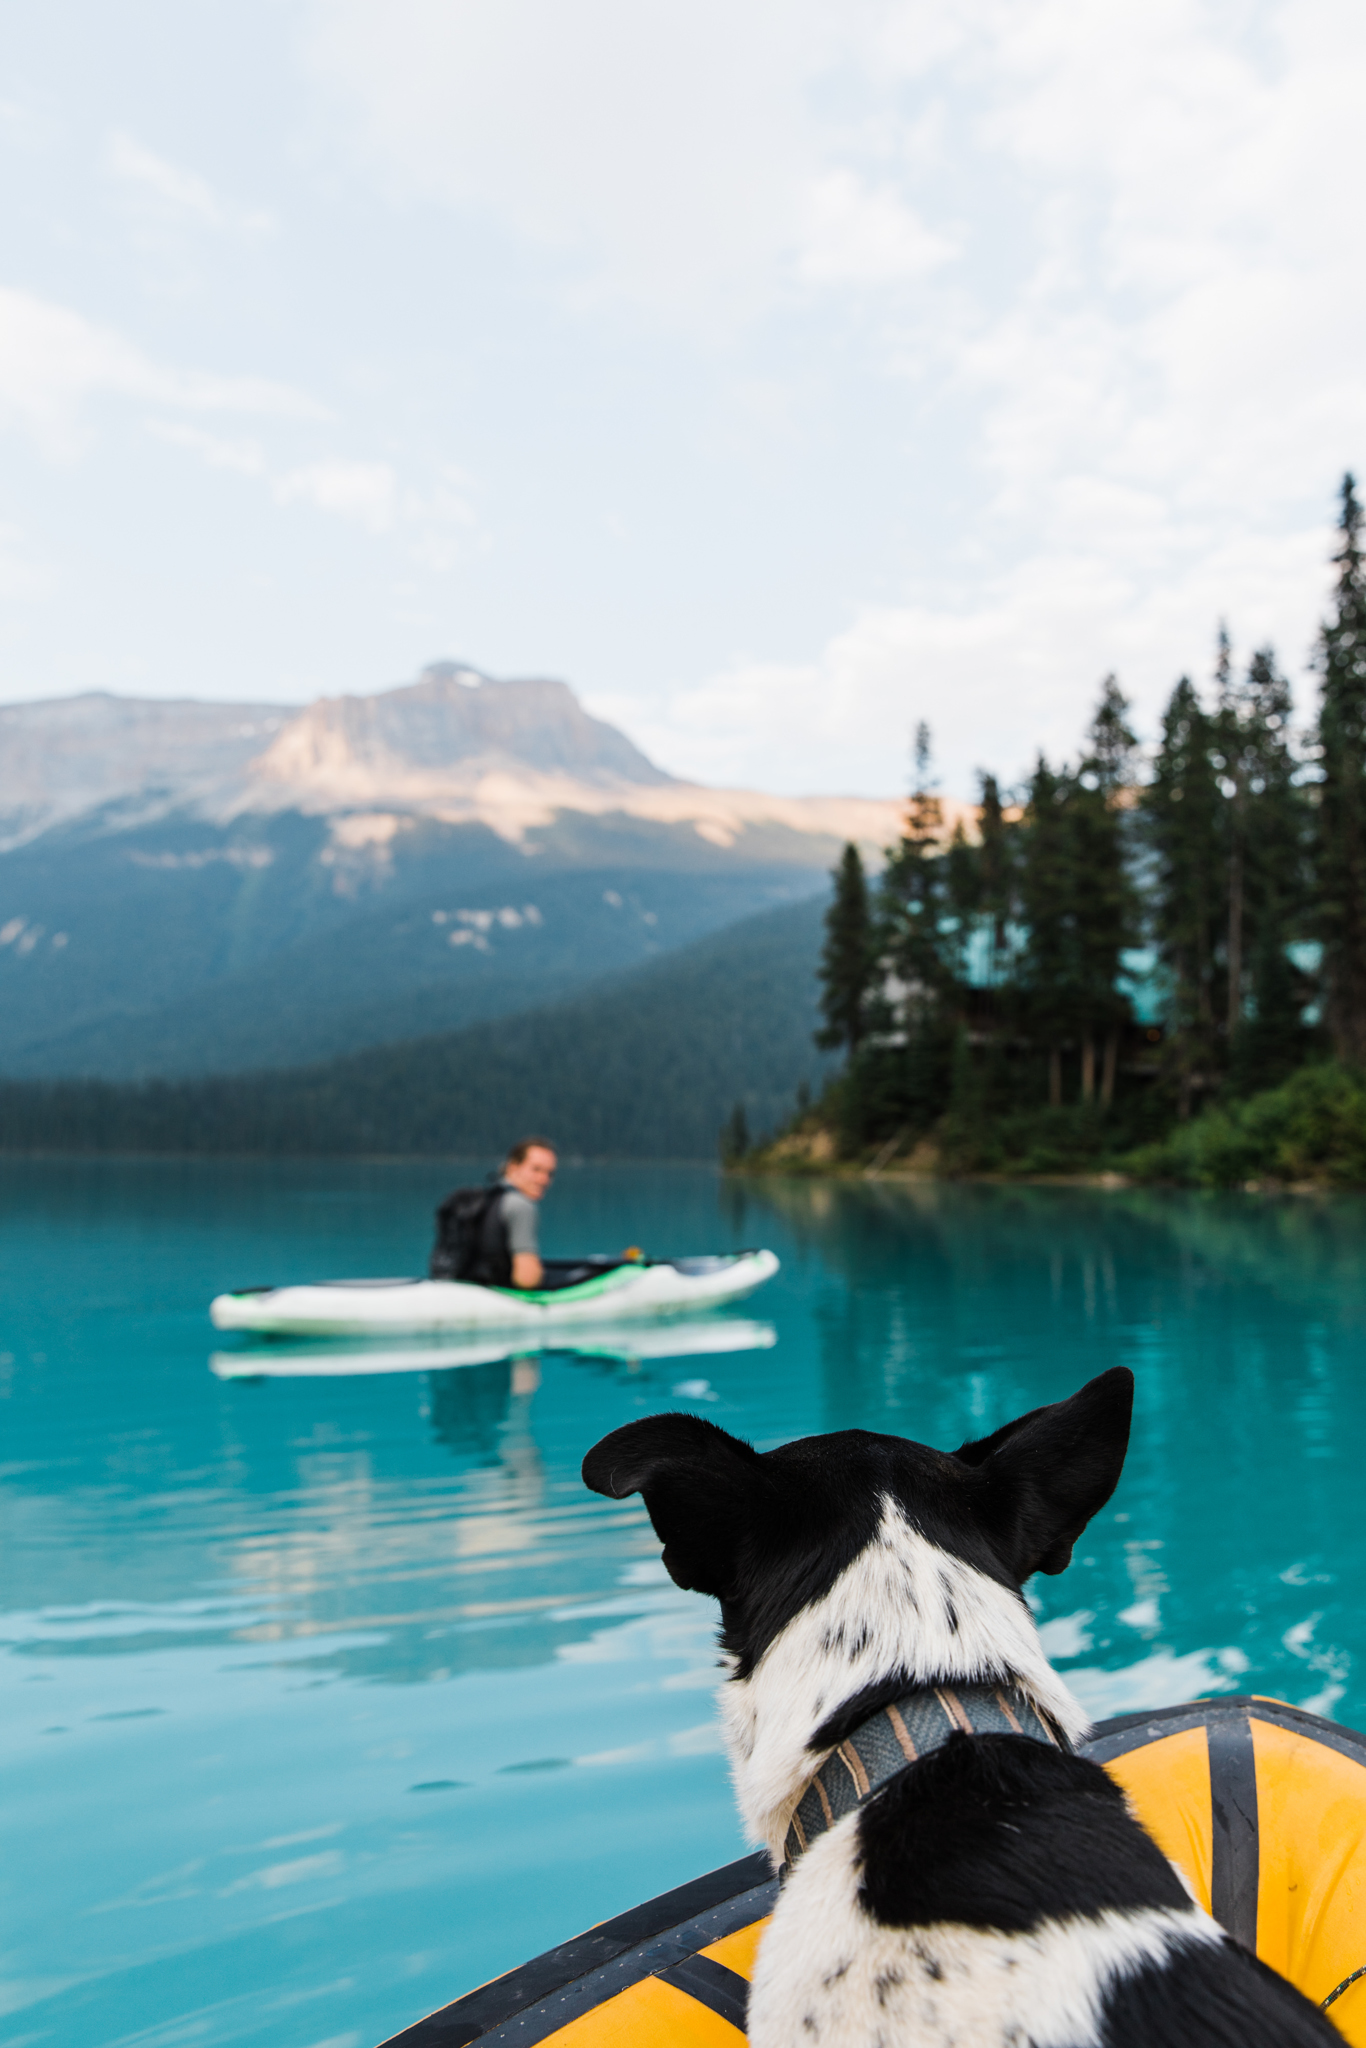 kayaking in canada | utah and california adventure elopement photographers | the hearnes adventure photography | www.thehearnes.com